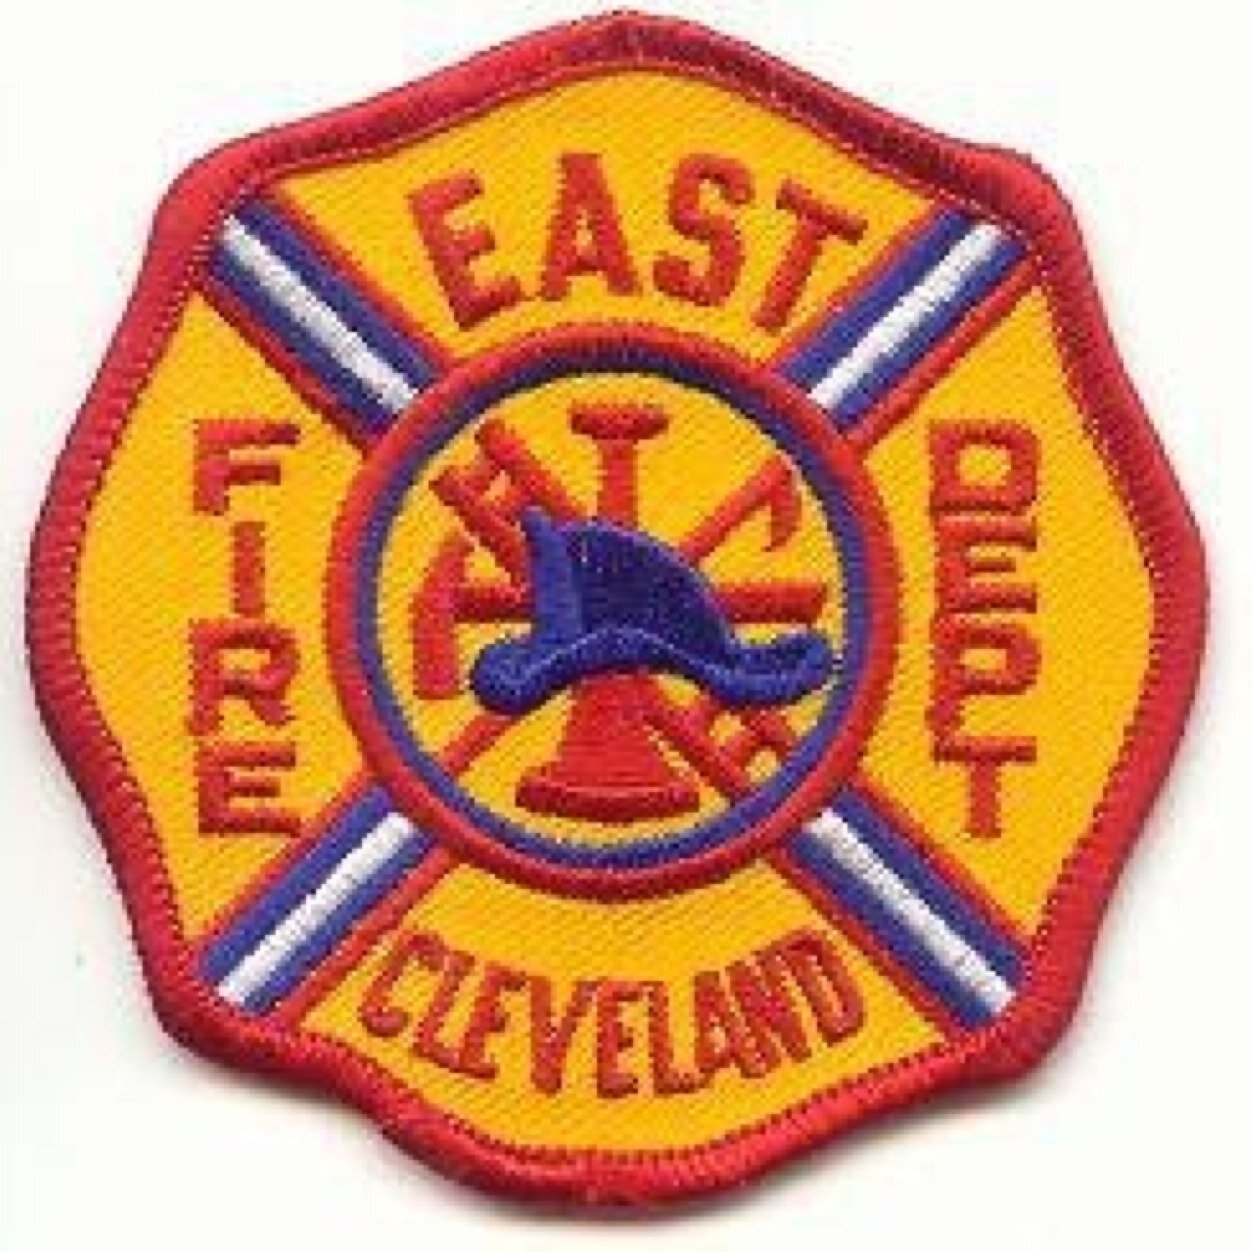 Protecting the life and property of the City of East Cleveland